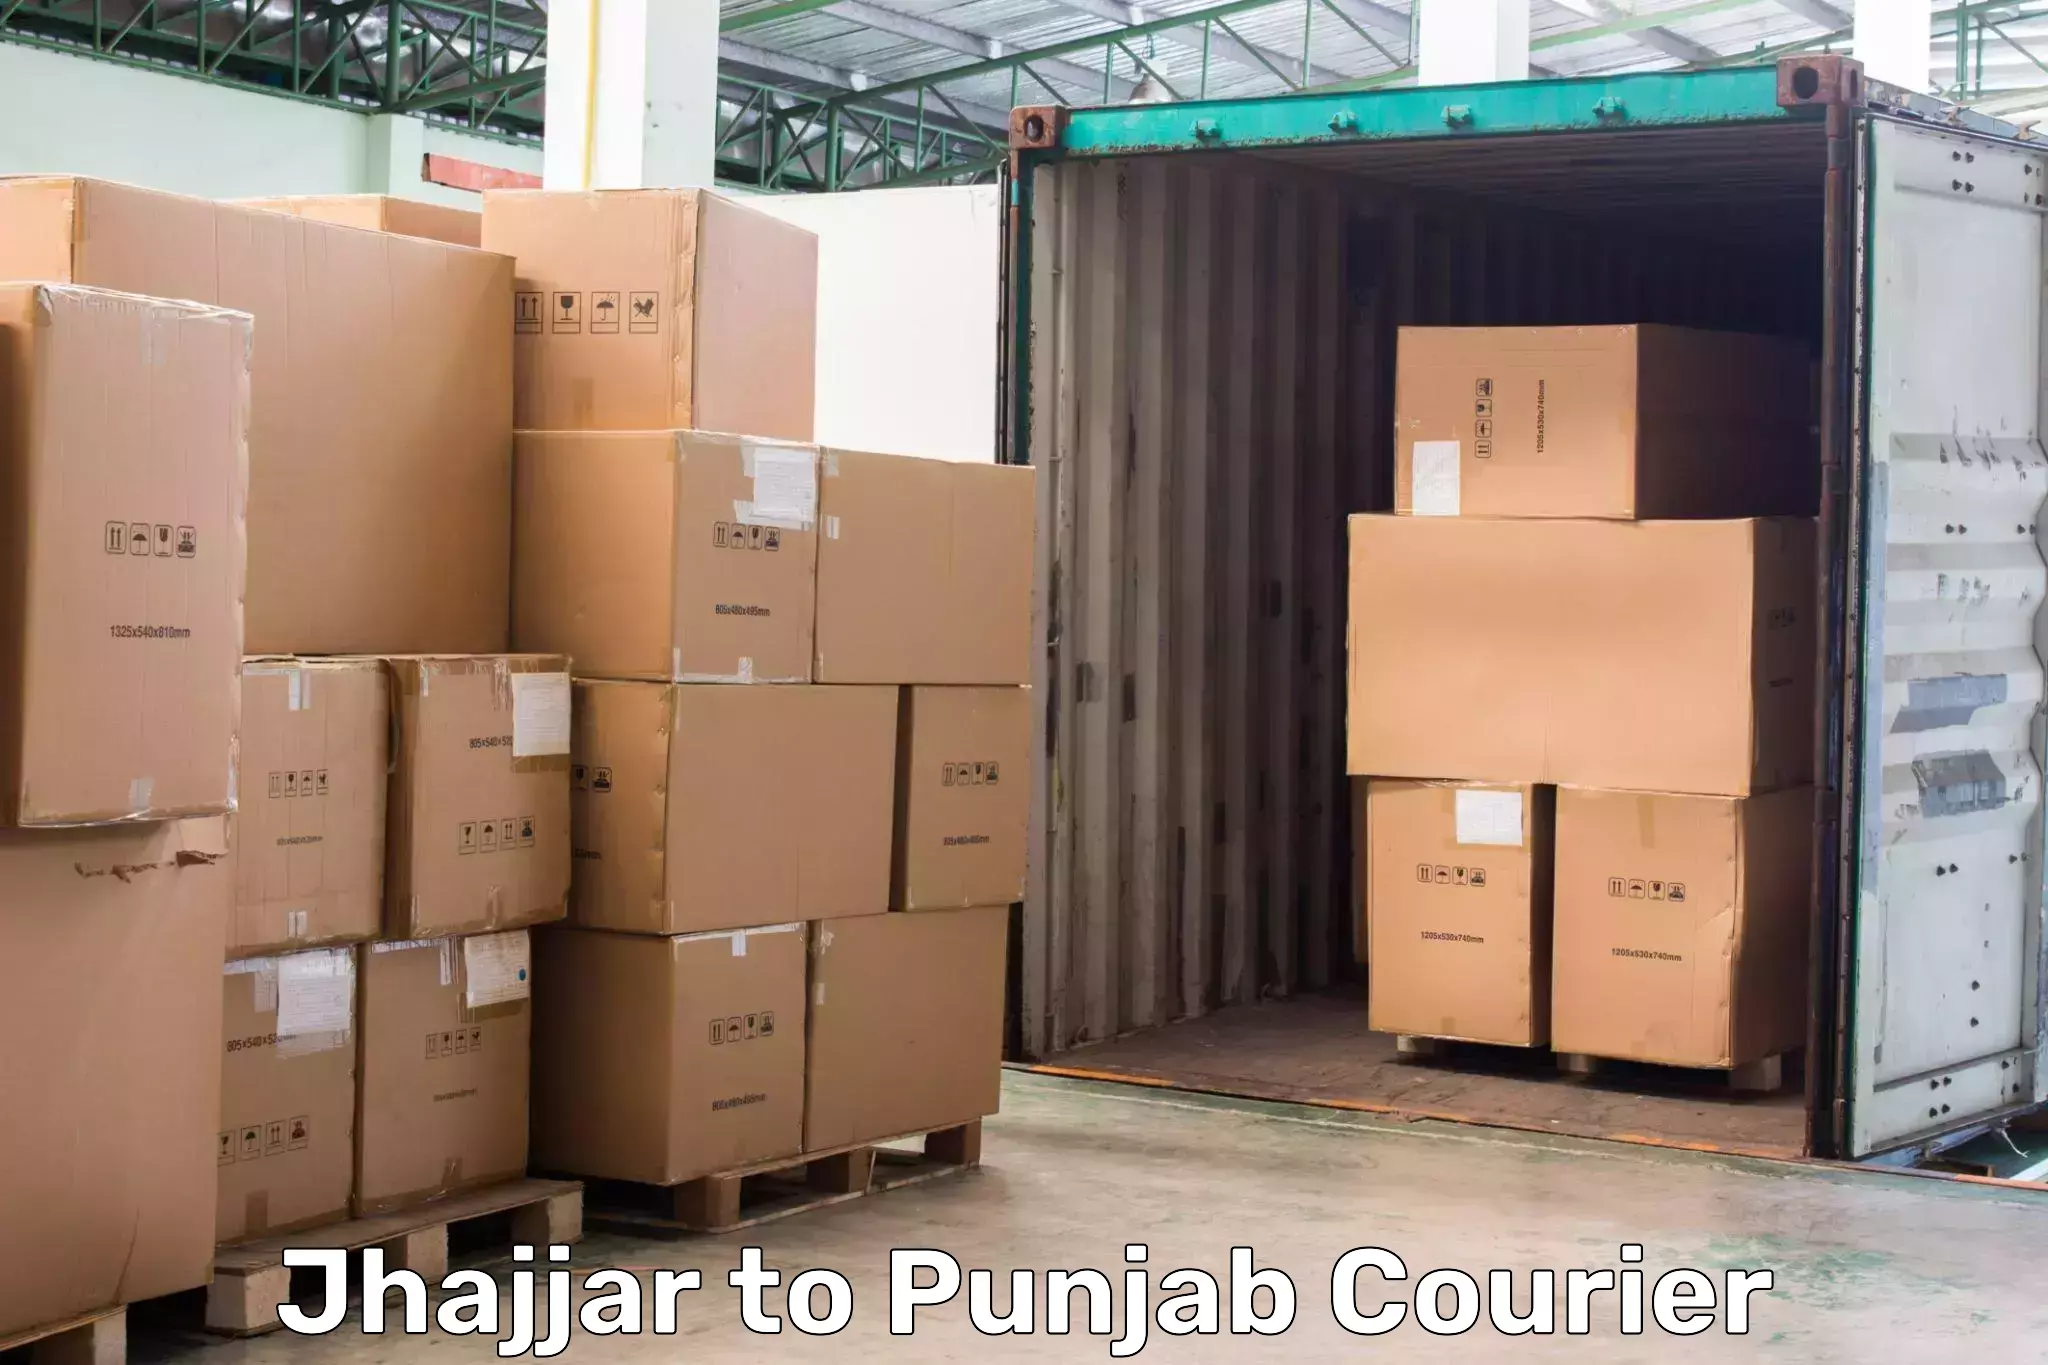 Subscription-based courier Jhajjar to Abohar